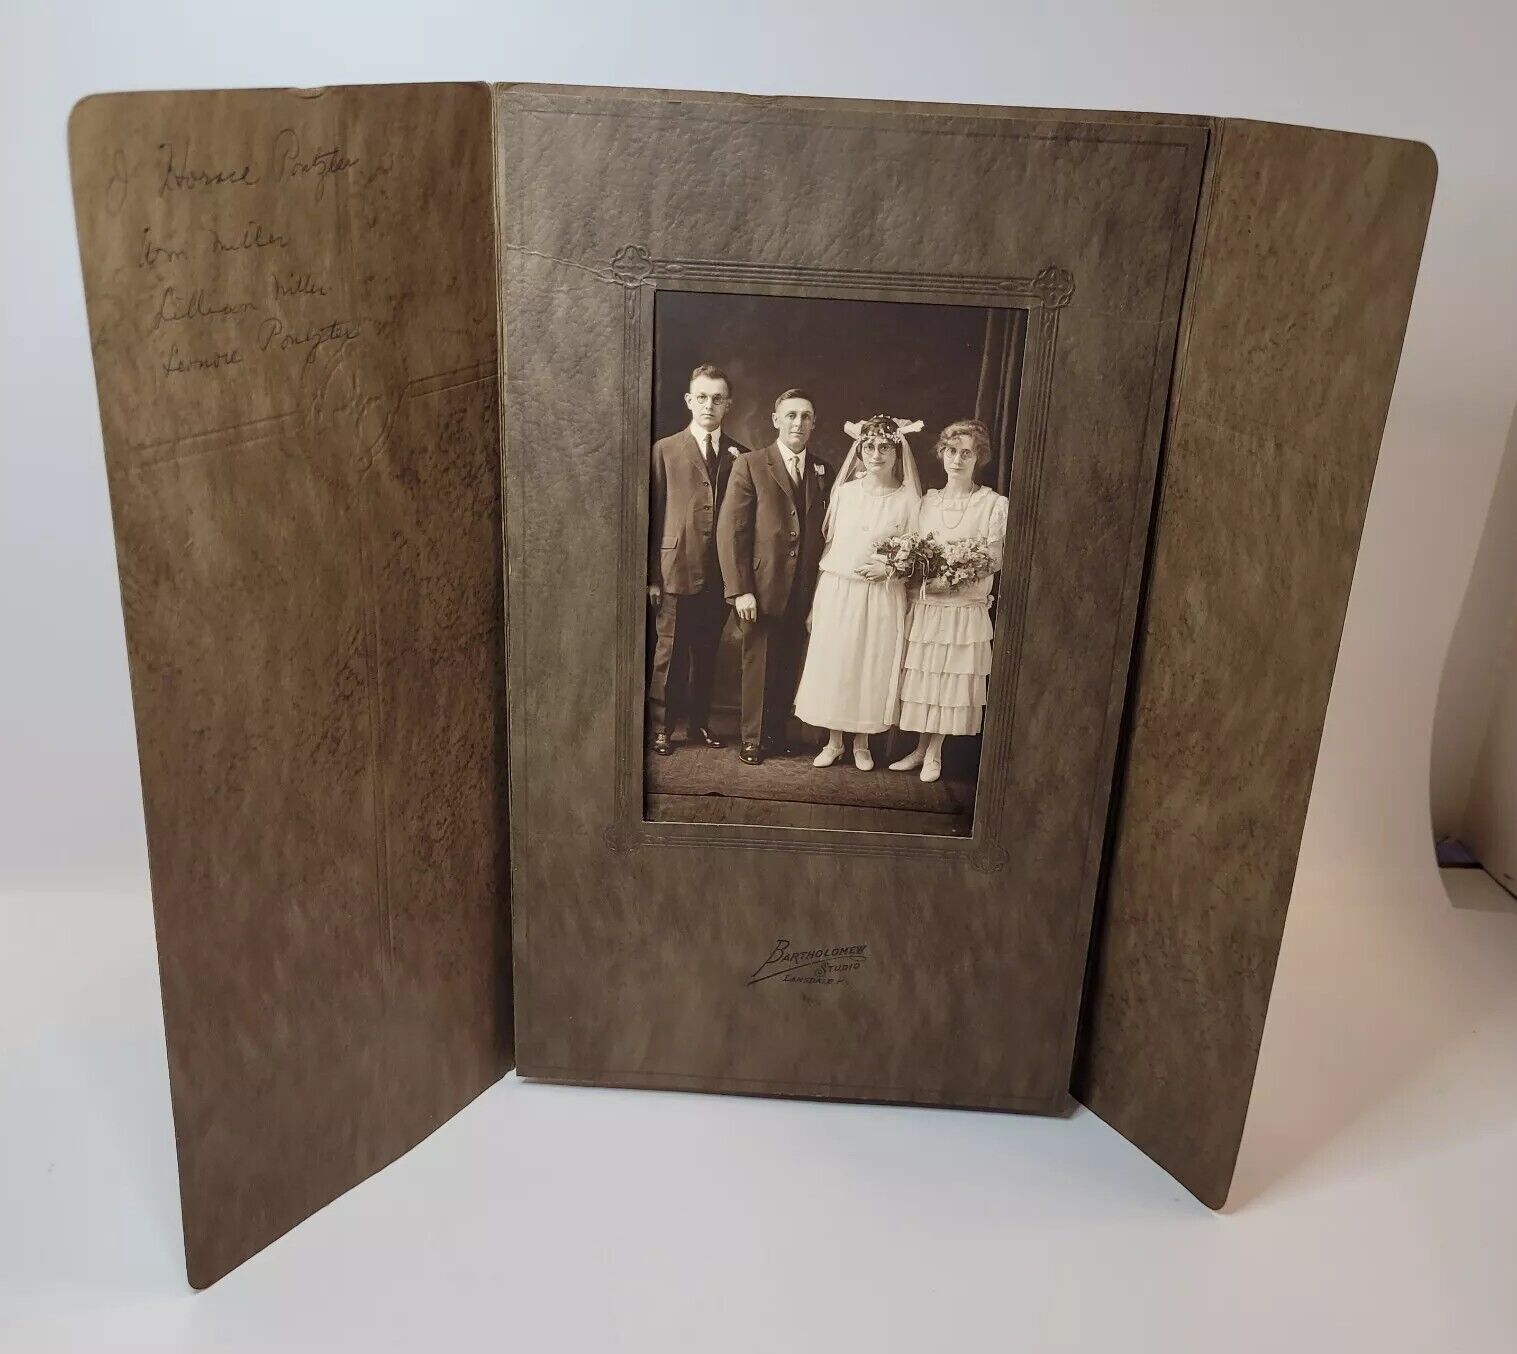 Antique 1920s Wedding Party Photo Bride Groom Attendents Horned Rim Glasses PA 